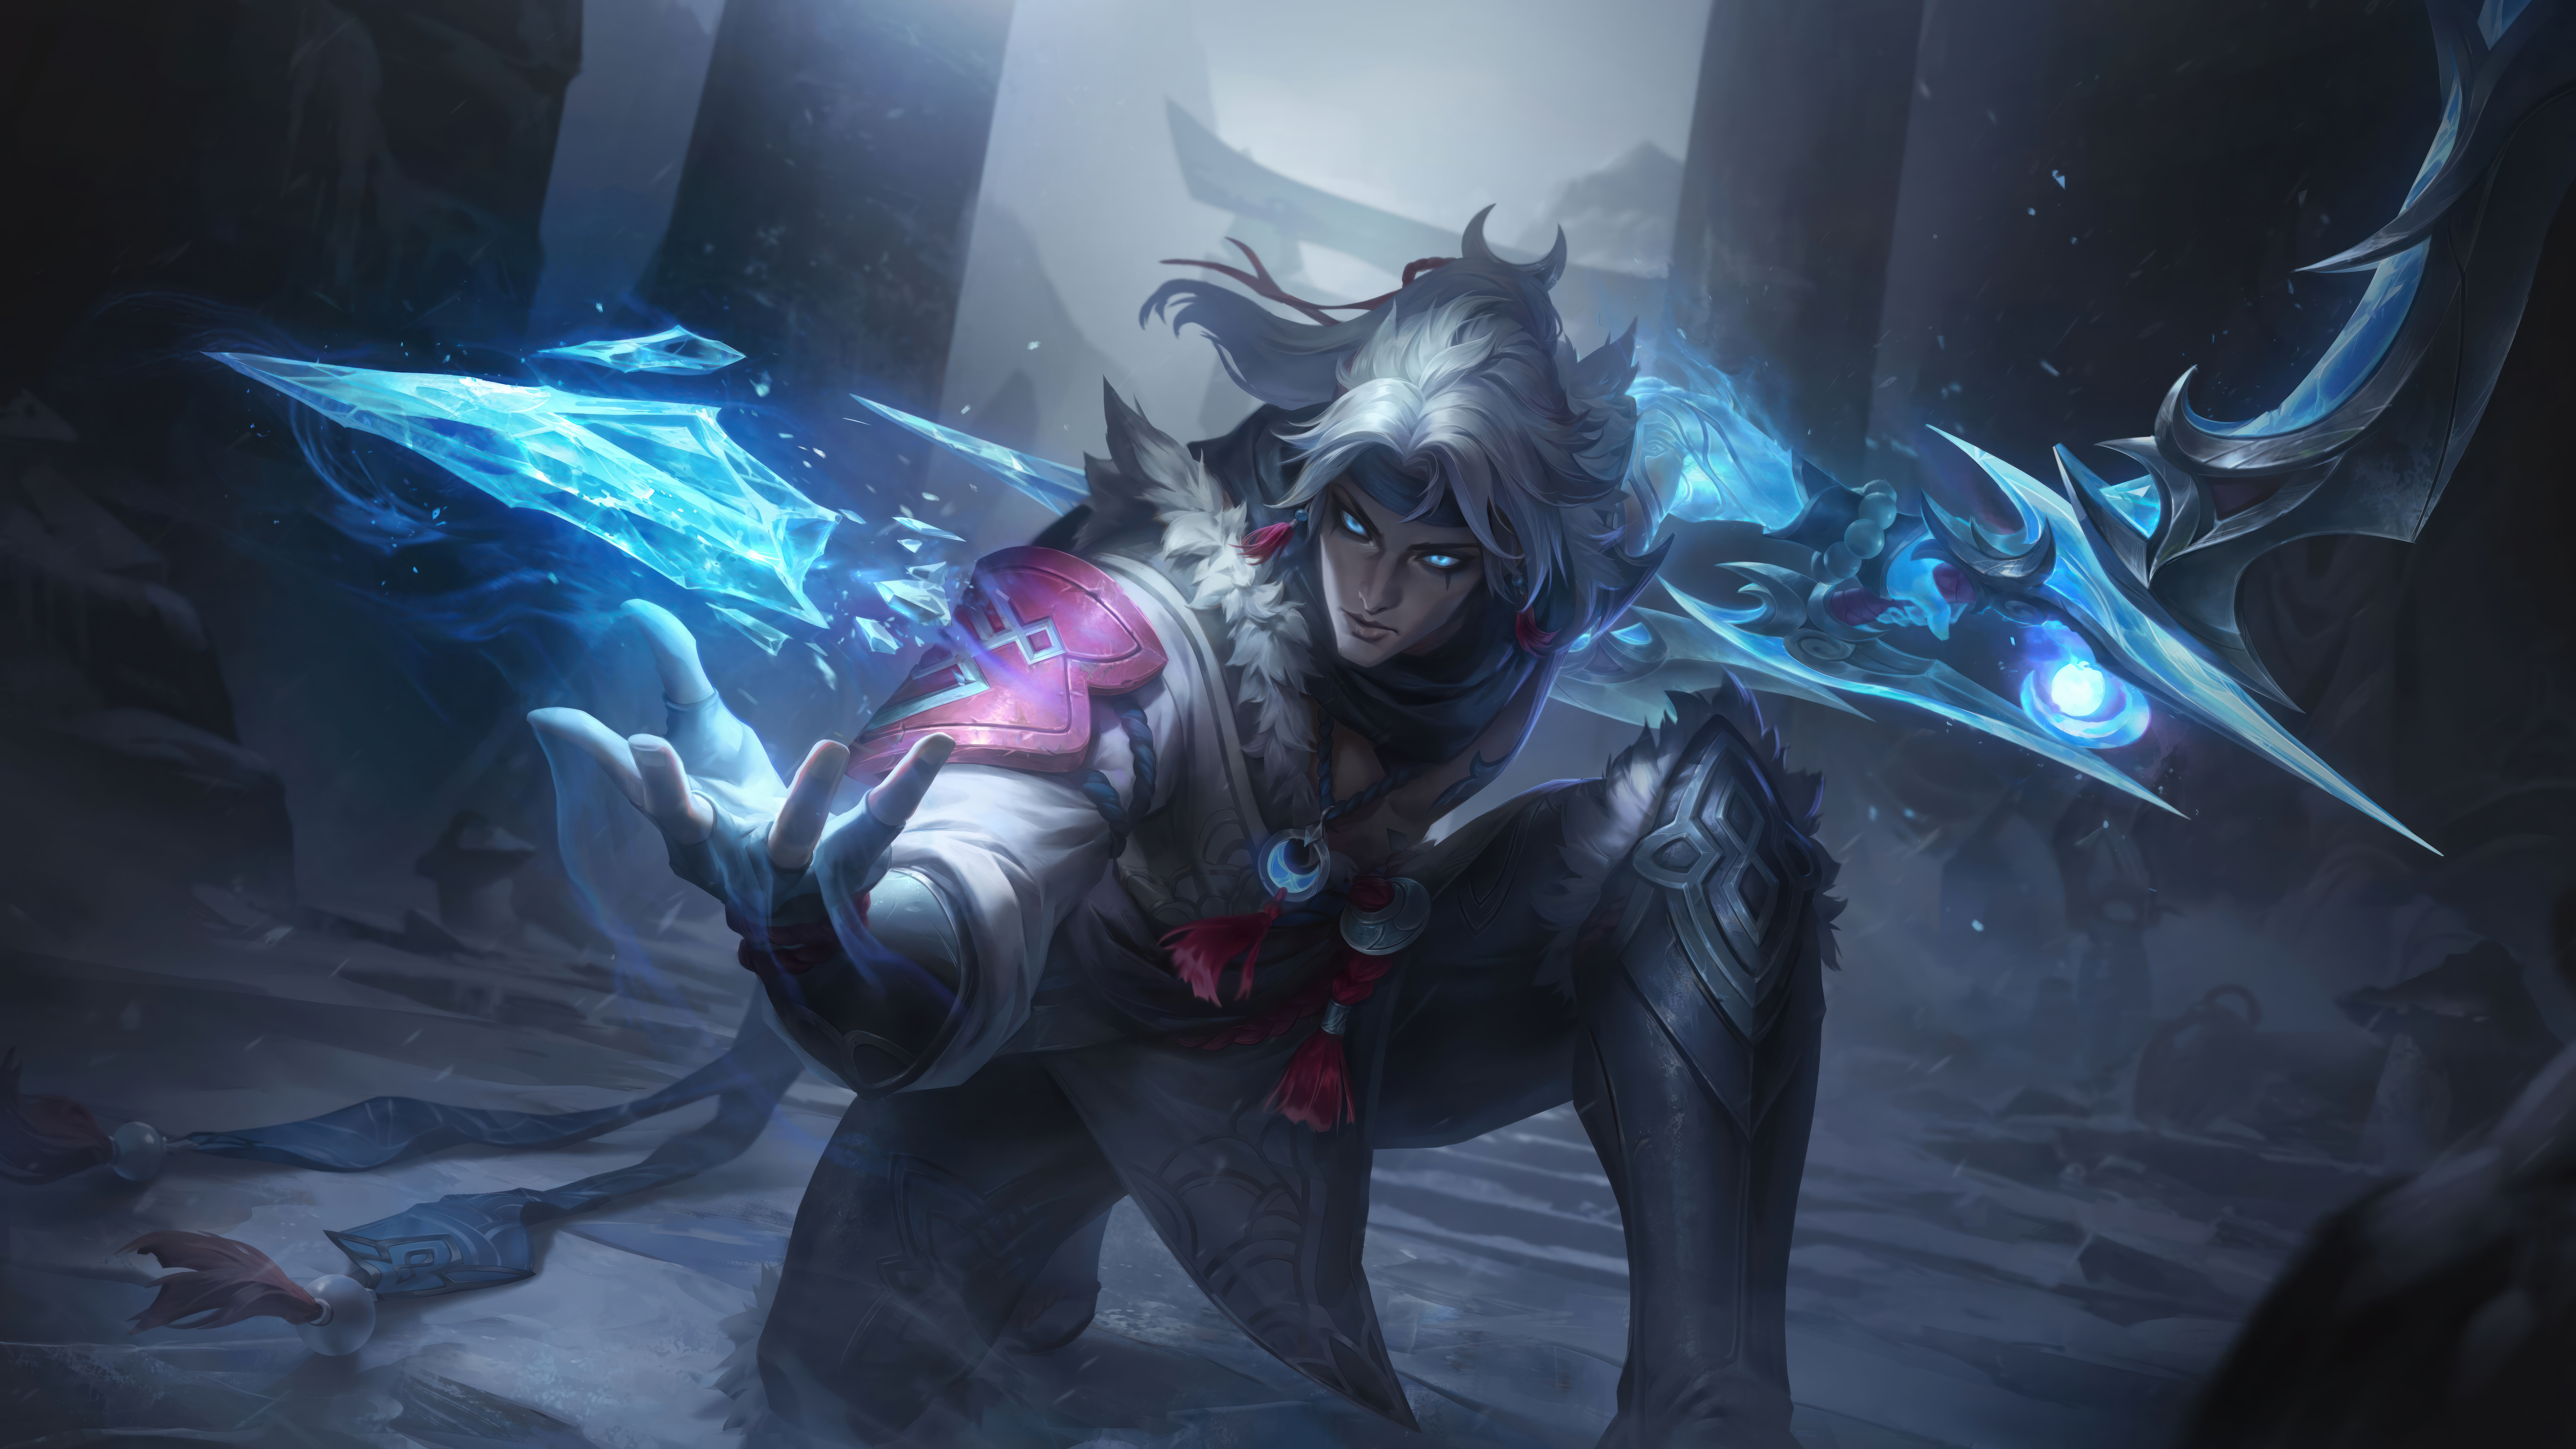 General 7680x4320 Snow Moon (League of Legends) Varus (League of Legends) League of Legends digital art Riot Games GZG 4K video games Adcarry ADC video game art video game characters